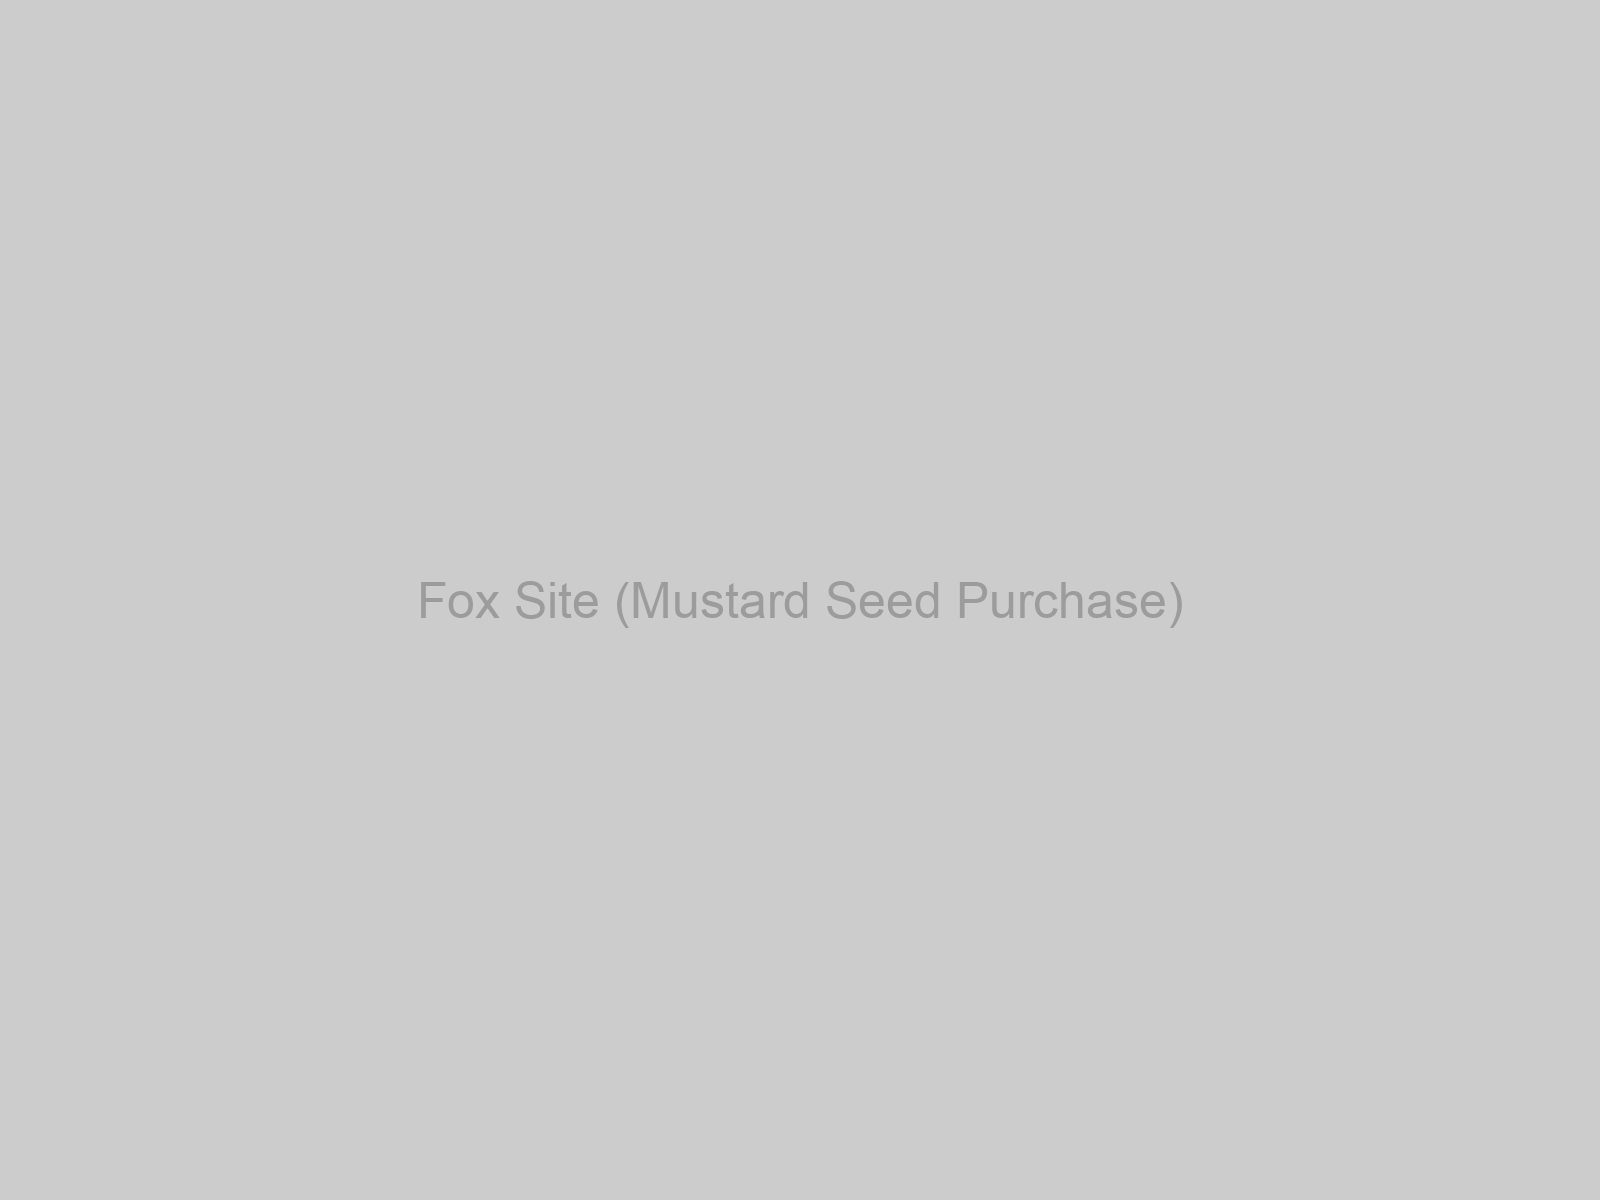 Fox Site (Mustard Seed Purchase)